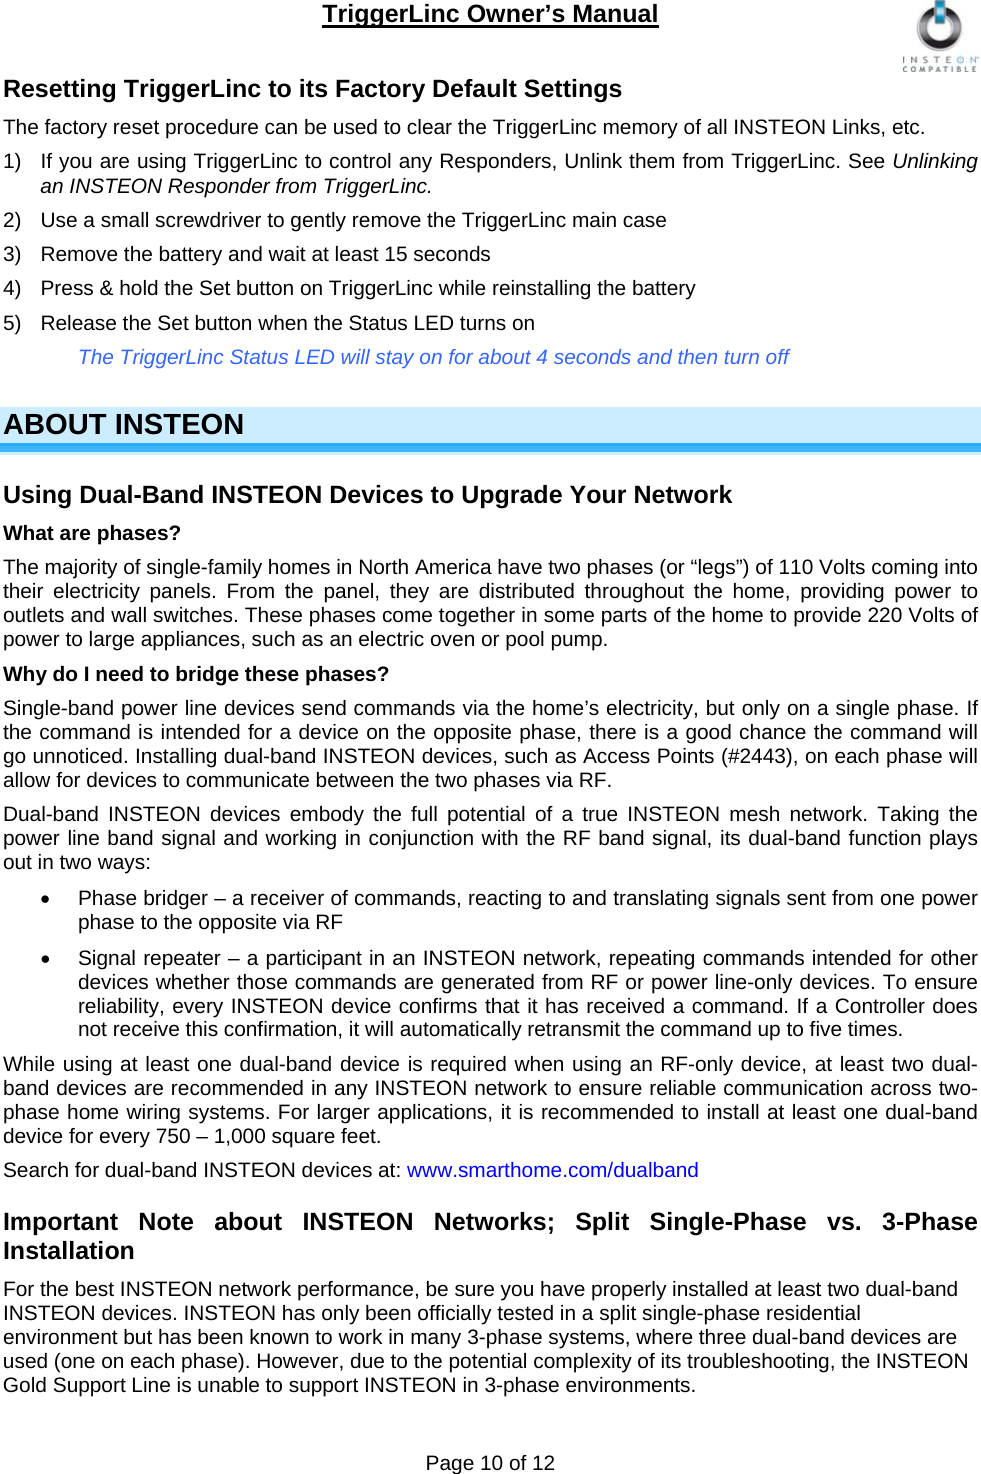 TriggerLinc Owner’s Manual   Page 10 of 12  Resetting TriggerLinc to its Factory Default Settings The factory reset procedure can be used to clear the TriggerLinc memory of all INSTEON Links, etc.   1)  If you are using TriggerLinc to control any Responders, Unlink them from TriggerLinc. See Unlinking an INSTEON Responder from TriggerLinc.   2)  Use a small screwdriver to gently remove the TriggerLinc main case 3)  Remove the battery and wait at least 15 seconds 4)  Press &amp; hold the Set button on TriggerLinc while reinstalling the battery 5)  Release the Set button when the Status LED turns on The TriggerLinc Status LED will stay on for about 4 seconds and then turn off   ABOUT INSTEON Using Dual-Band INSTEON Devices to Upgrade Your Network  What are phases? The majority of single-family homes in North America have two phases (or “legs”) of 110 Volts coming into their electricity panels. From the panel, they are distributed throughout the home, providing power to outlets and wall switches. These phases come together in some parts of the home to provide 220 Volts of power to large appliances, such as an electric oven or pool pump. Why do I need to bridge these phases? Single-band power line devices send commands via the home’s electricity, but only on a single phase. If the command is intended for a device on the opposite phase, there is a good chance the command will go unnoticed. Installing dual-band INSTEON devices, such as Access Points (#2443), on each phase will allow for devices to communicate between the two phases via RF. Dual-band INSTEON devices embody the full potential of a true INSTEON mesh network. Taking the power line band signal and working in conjunction with the RF band signal, its dual-band function plays out in two ways:   Phase bridger – a receiver of commands, reacting to and translating signals sent from one power phase to the opposite via RF   Signal repeater – a participant in an INSTEON network, repeating commands intended for other devices whether those commands are generated from RF or power line-only devices. To ensure reliability, every INSTEON device confirms that it has received a command. If a Controller does not receive this confirmation, it will automatically retransmit the command up to five times.  While using at least one dual-band device is required when using an RF-only device, at least two dual-band devices are recommended in any INSTEON network to ensure reliable communication across two-phase home wiring systems. For larger applications, it is recommended to install at least one dual-band device for every 750 – 1,000 square feet. Search for dual-band INSTEON devices at: www.smarthome.com/dualband Important Note about INSTEON Networks; Split Single-Phase vs. 3-Phase Installation For the best INSTEON network performance, be sure you have properly installed at least two dual-band INSTEON devices. INSTEON has only been officially tested in a split single-phase residential environment but has been known to work in many 3-phase systems, where three dual-band devices are used (one on each phase). However, due to the potential complexity of its troubleshooting, the INSTEON Gold Support Line is unable to support INSTEON in 3-phase environments. 